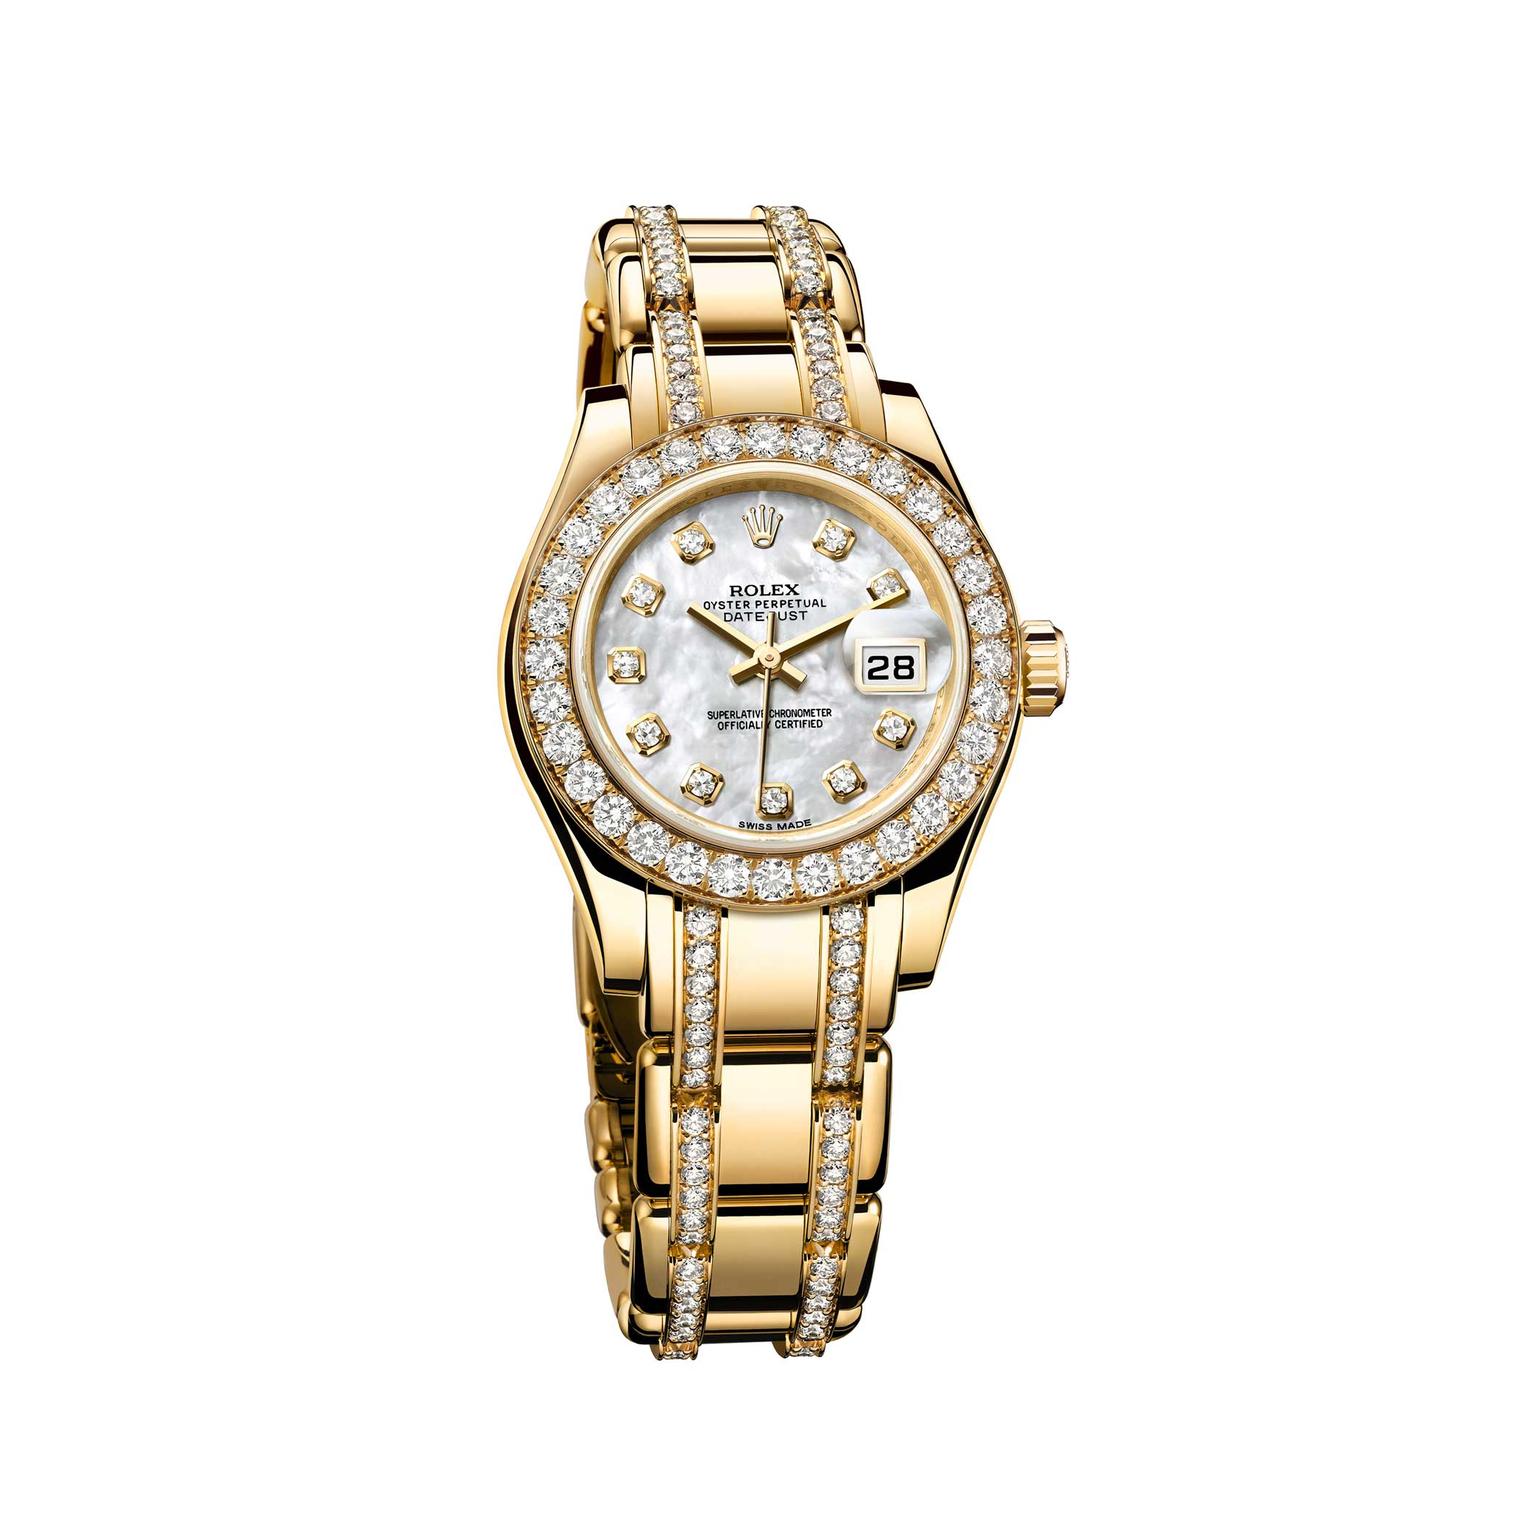 Rolex Lady Datejust Pearlmaster watch